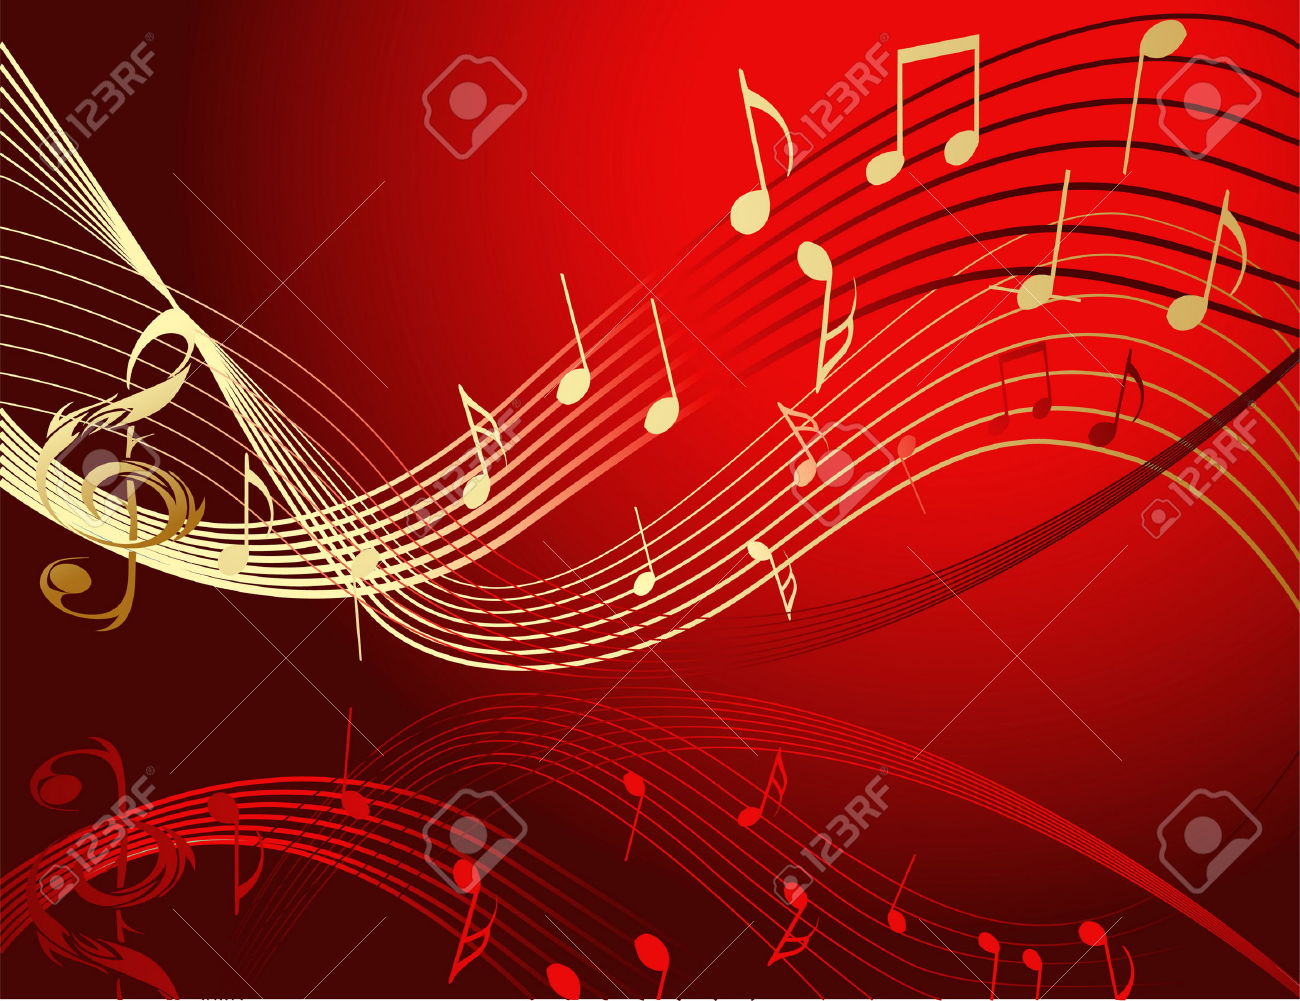 Background For Music On Wallpaperget